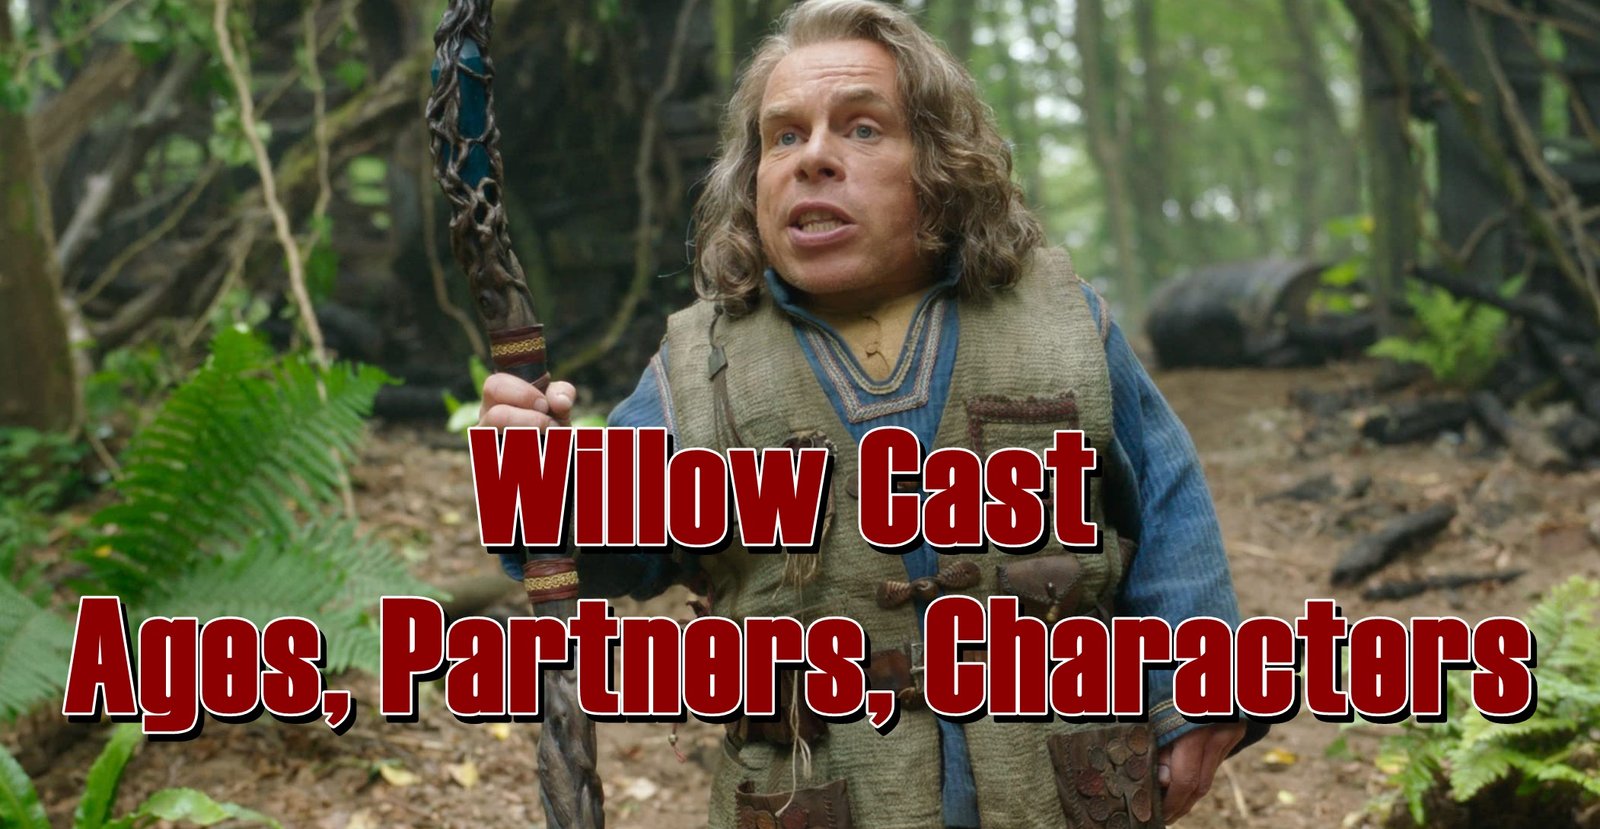 Willow Cast - Ages, Partners, Characters